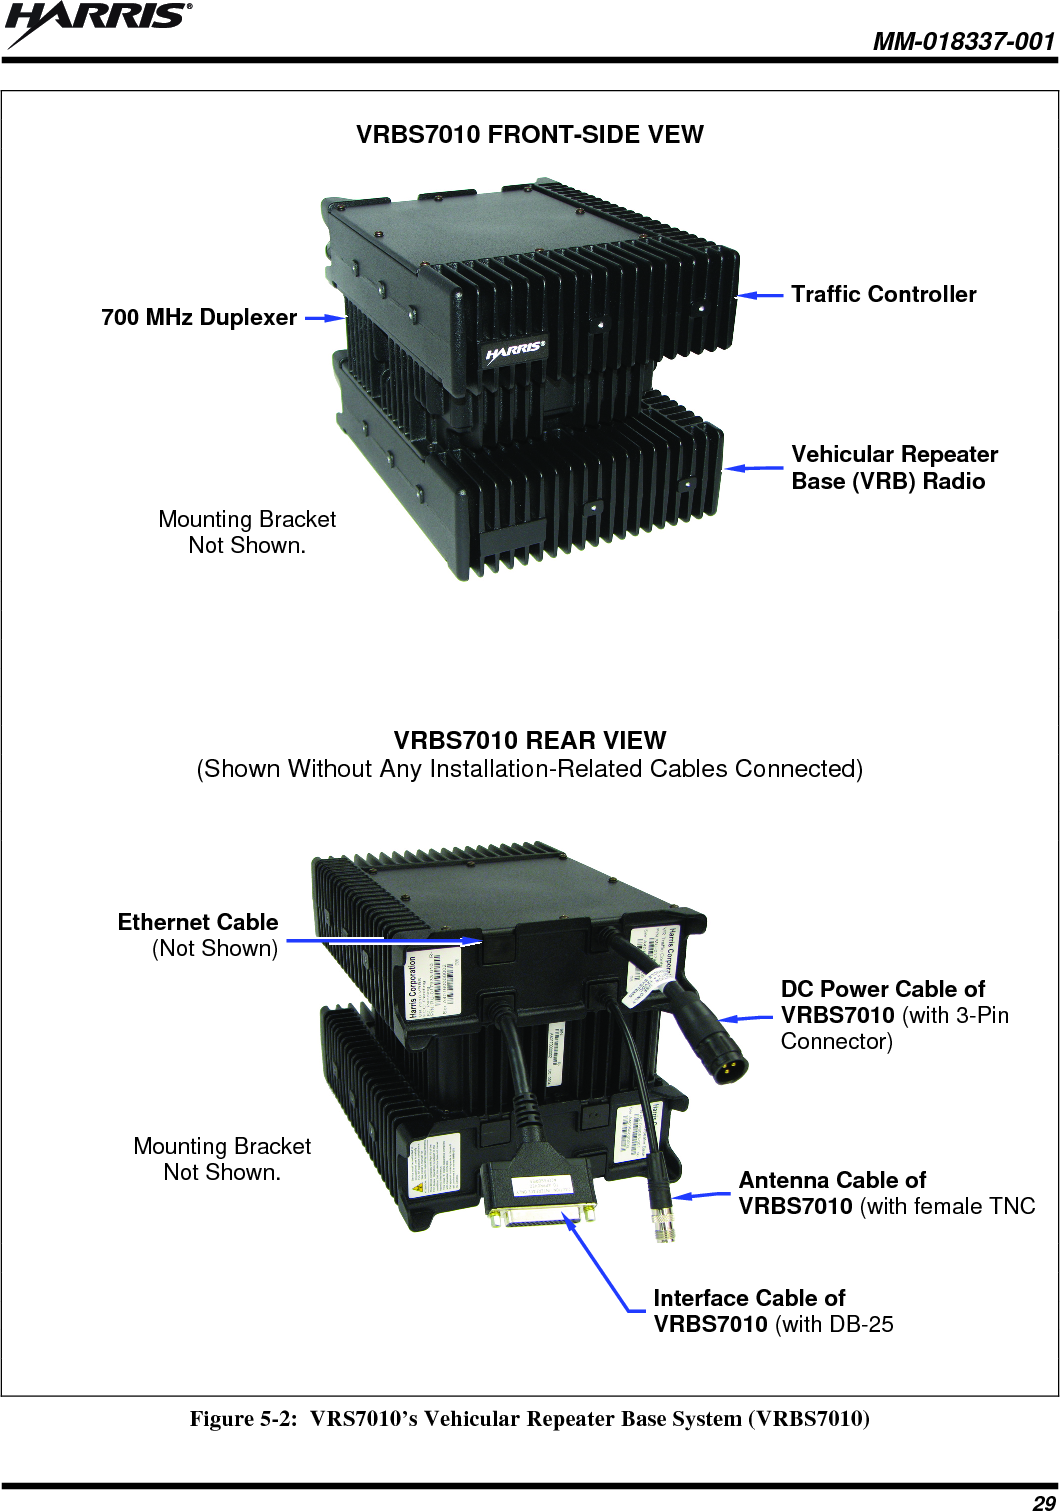  MM-018337-001 29  VRBS7010 FRONT-SIDE VEW        VRBS7010 REAR VIEW (Shown Without Any Installation-Related Cables Connected)         Figure 5-2:  VRS7010’s Vehicular Repeater Base System (VRBS7010)  Traffic Controller Vehicular Repeater Base (VRB) Radio 700 MHz DuplexerDC Power Cable of VRBS7010 (with 3-Pin Connector) Antenna Cable of VRBS7010 (with female TNC Interface Cable of VRBS7010 (with DB-25 Mounting Bracket Not Shown. Ethernet Cable (Not Shown) Mounting Bracket Not Shown. 